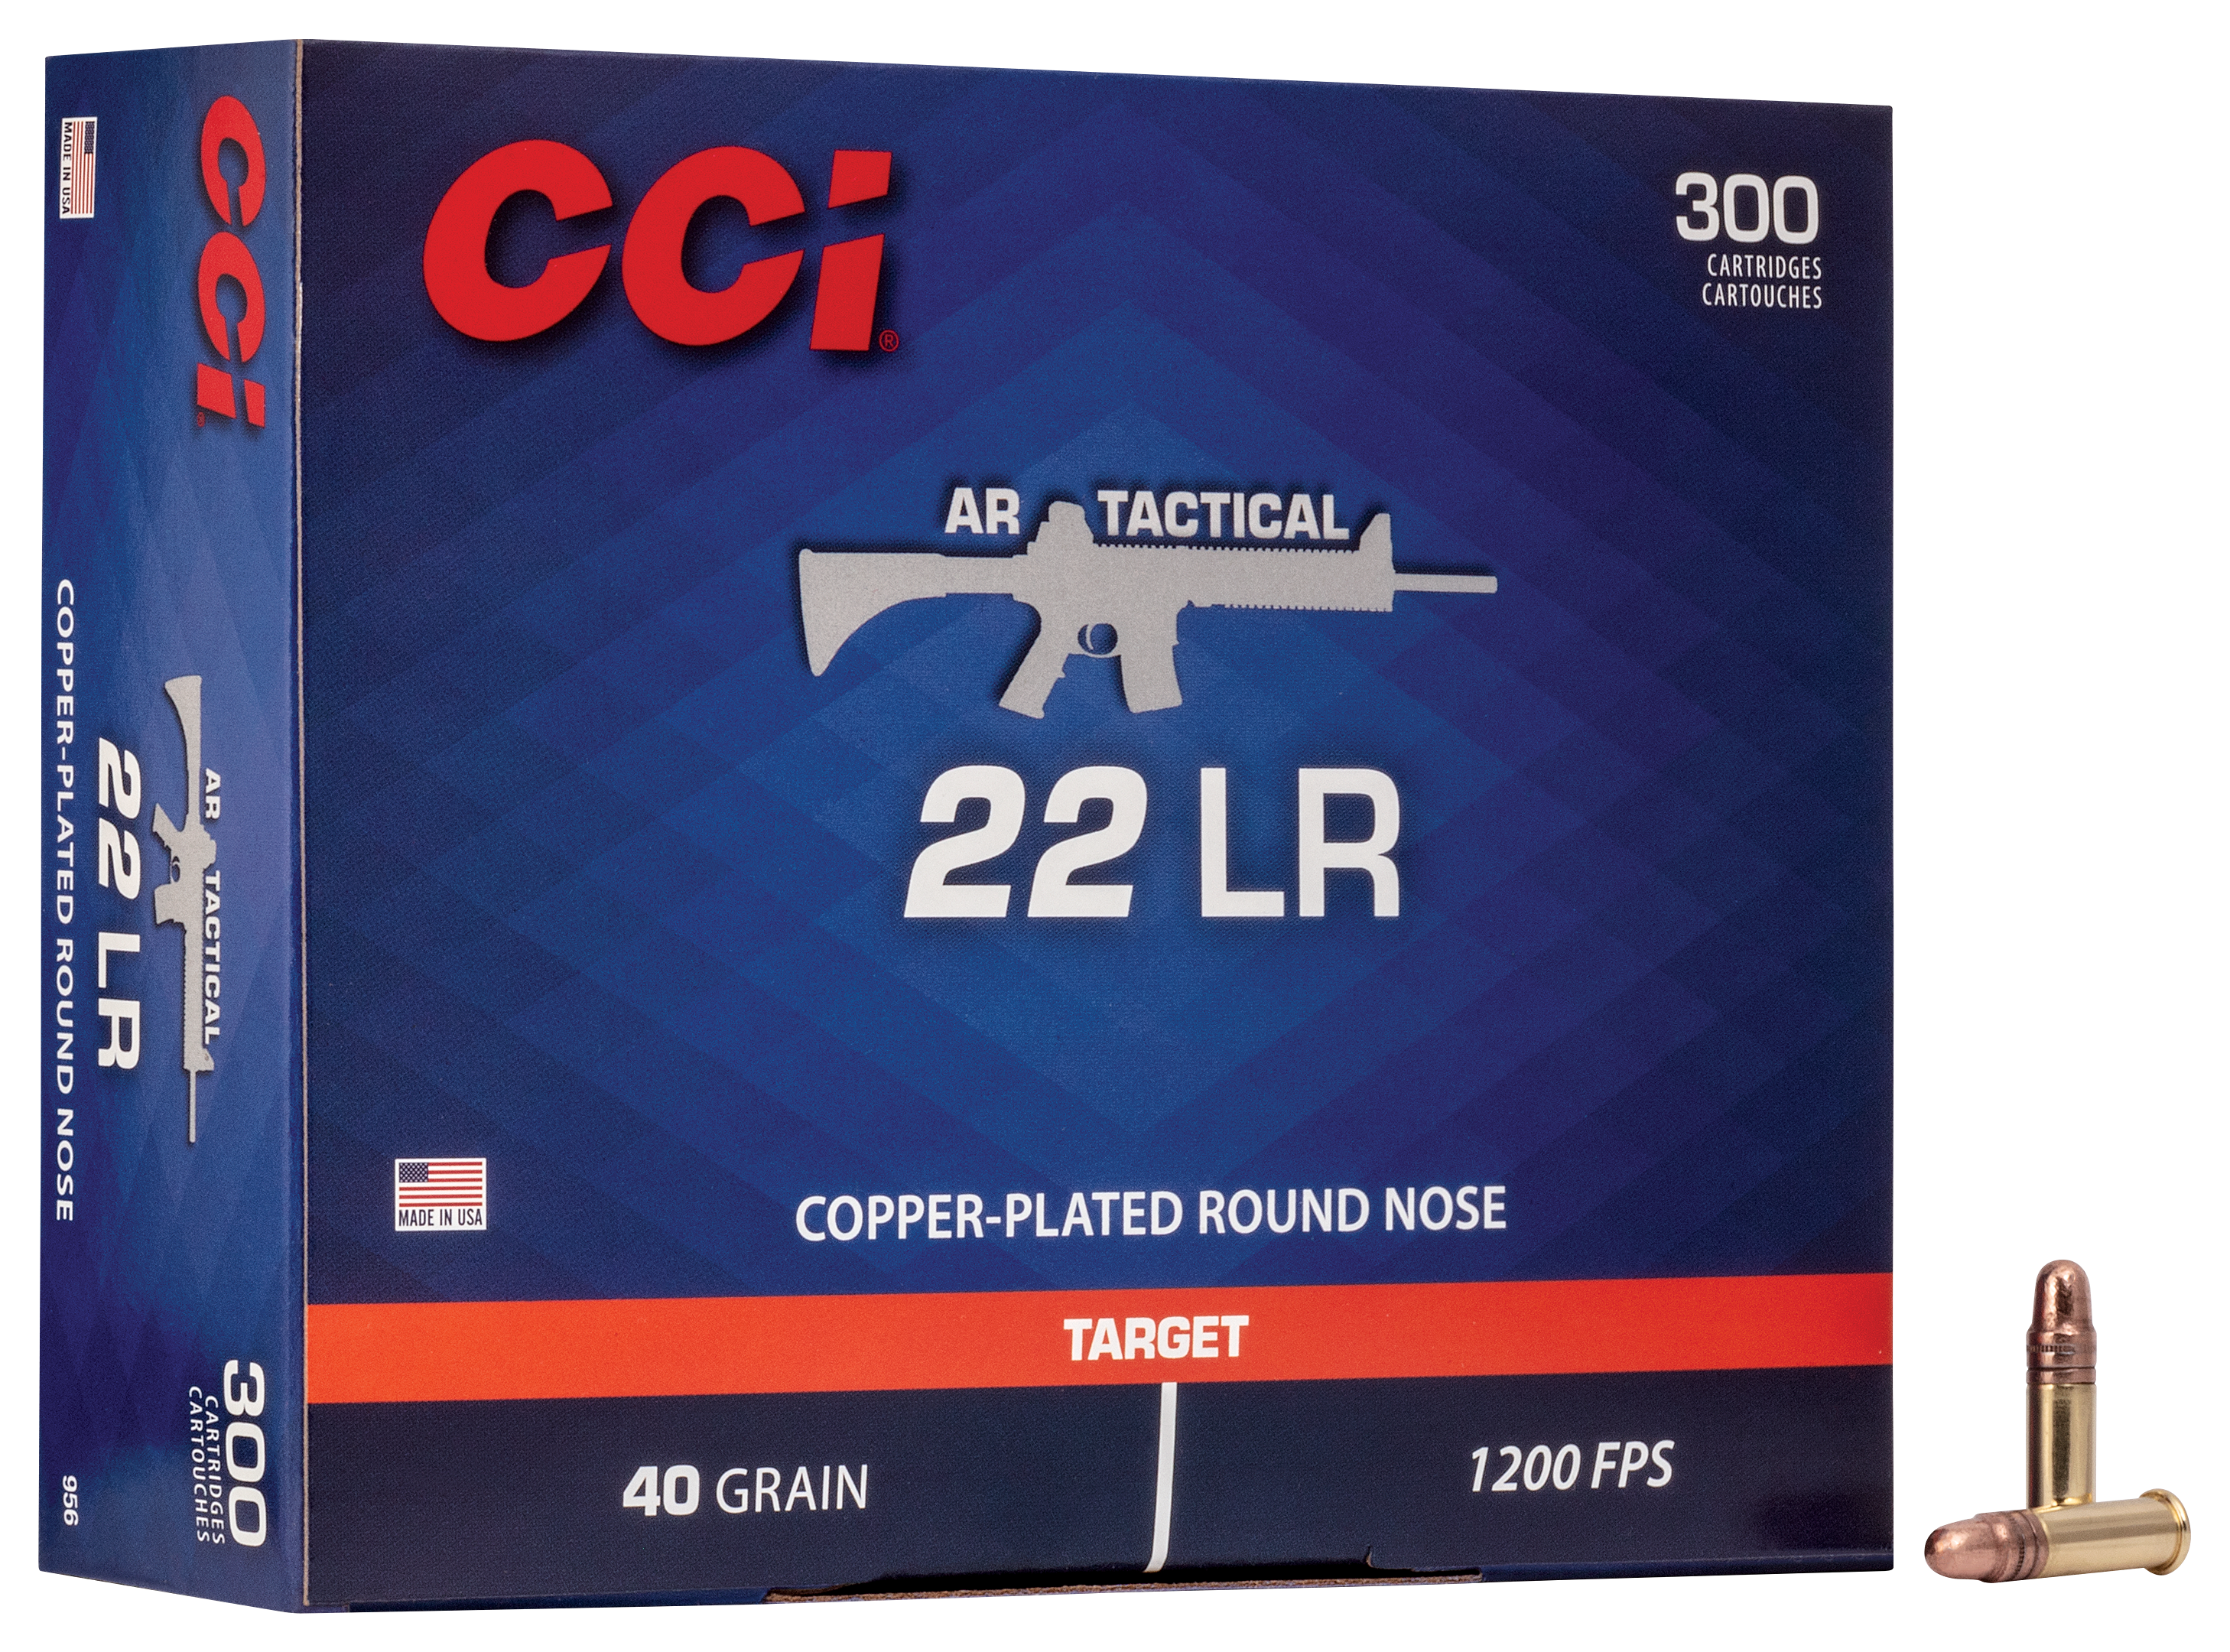 CCI AR Tactical Rimfire Ammo - Copper Plated Round Nose - 300 Rounds